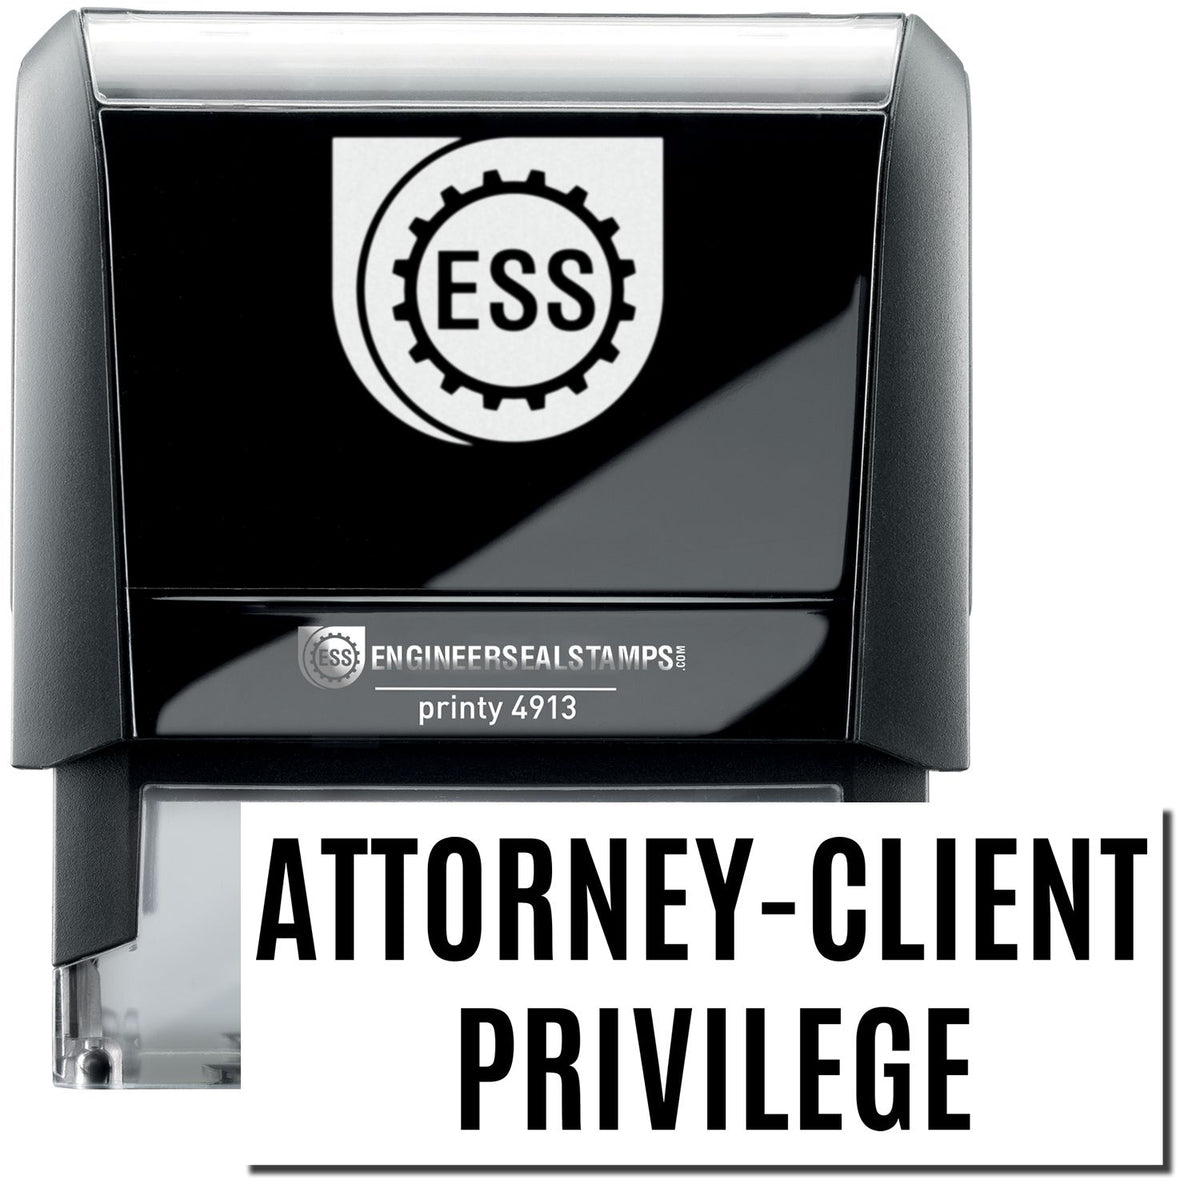 A self-inking stamp with a stamped image showing how the text &quot;ATTORNEY-CLIENT PRIVILEGE&quot; in a large font is displayed by it after stamping.